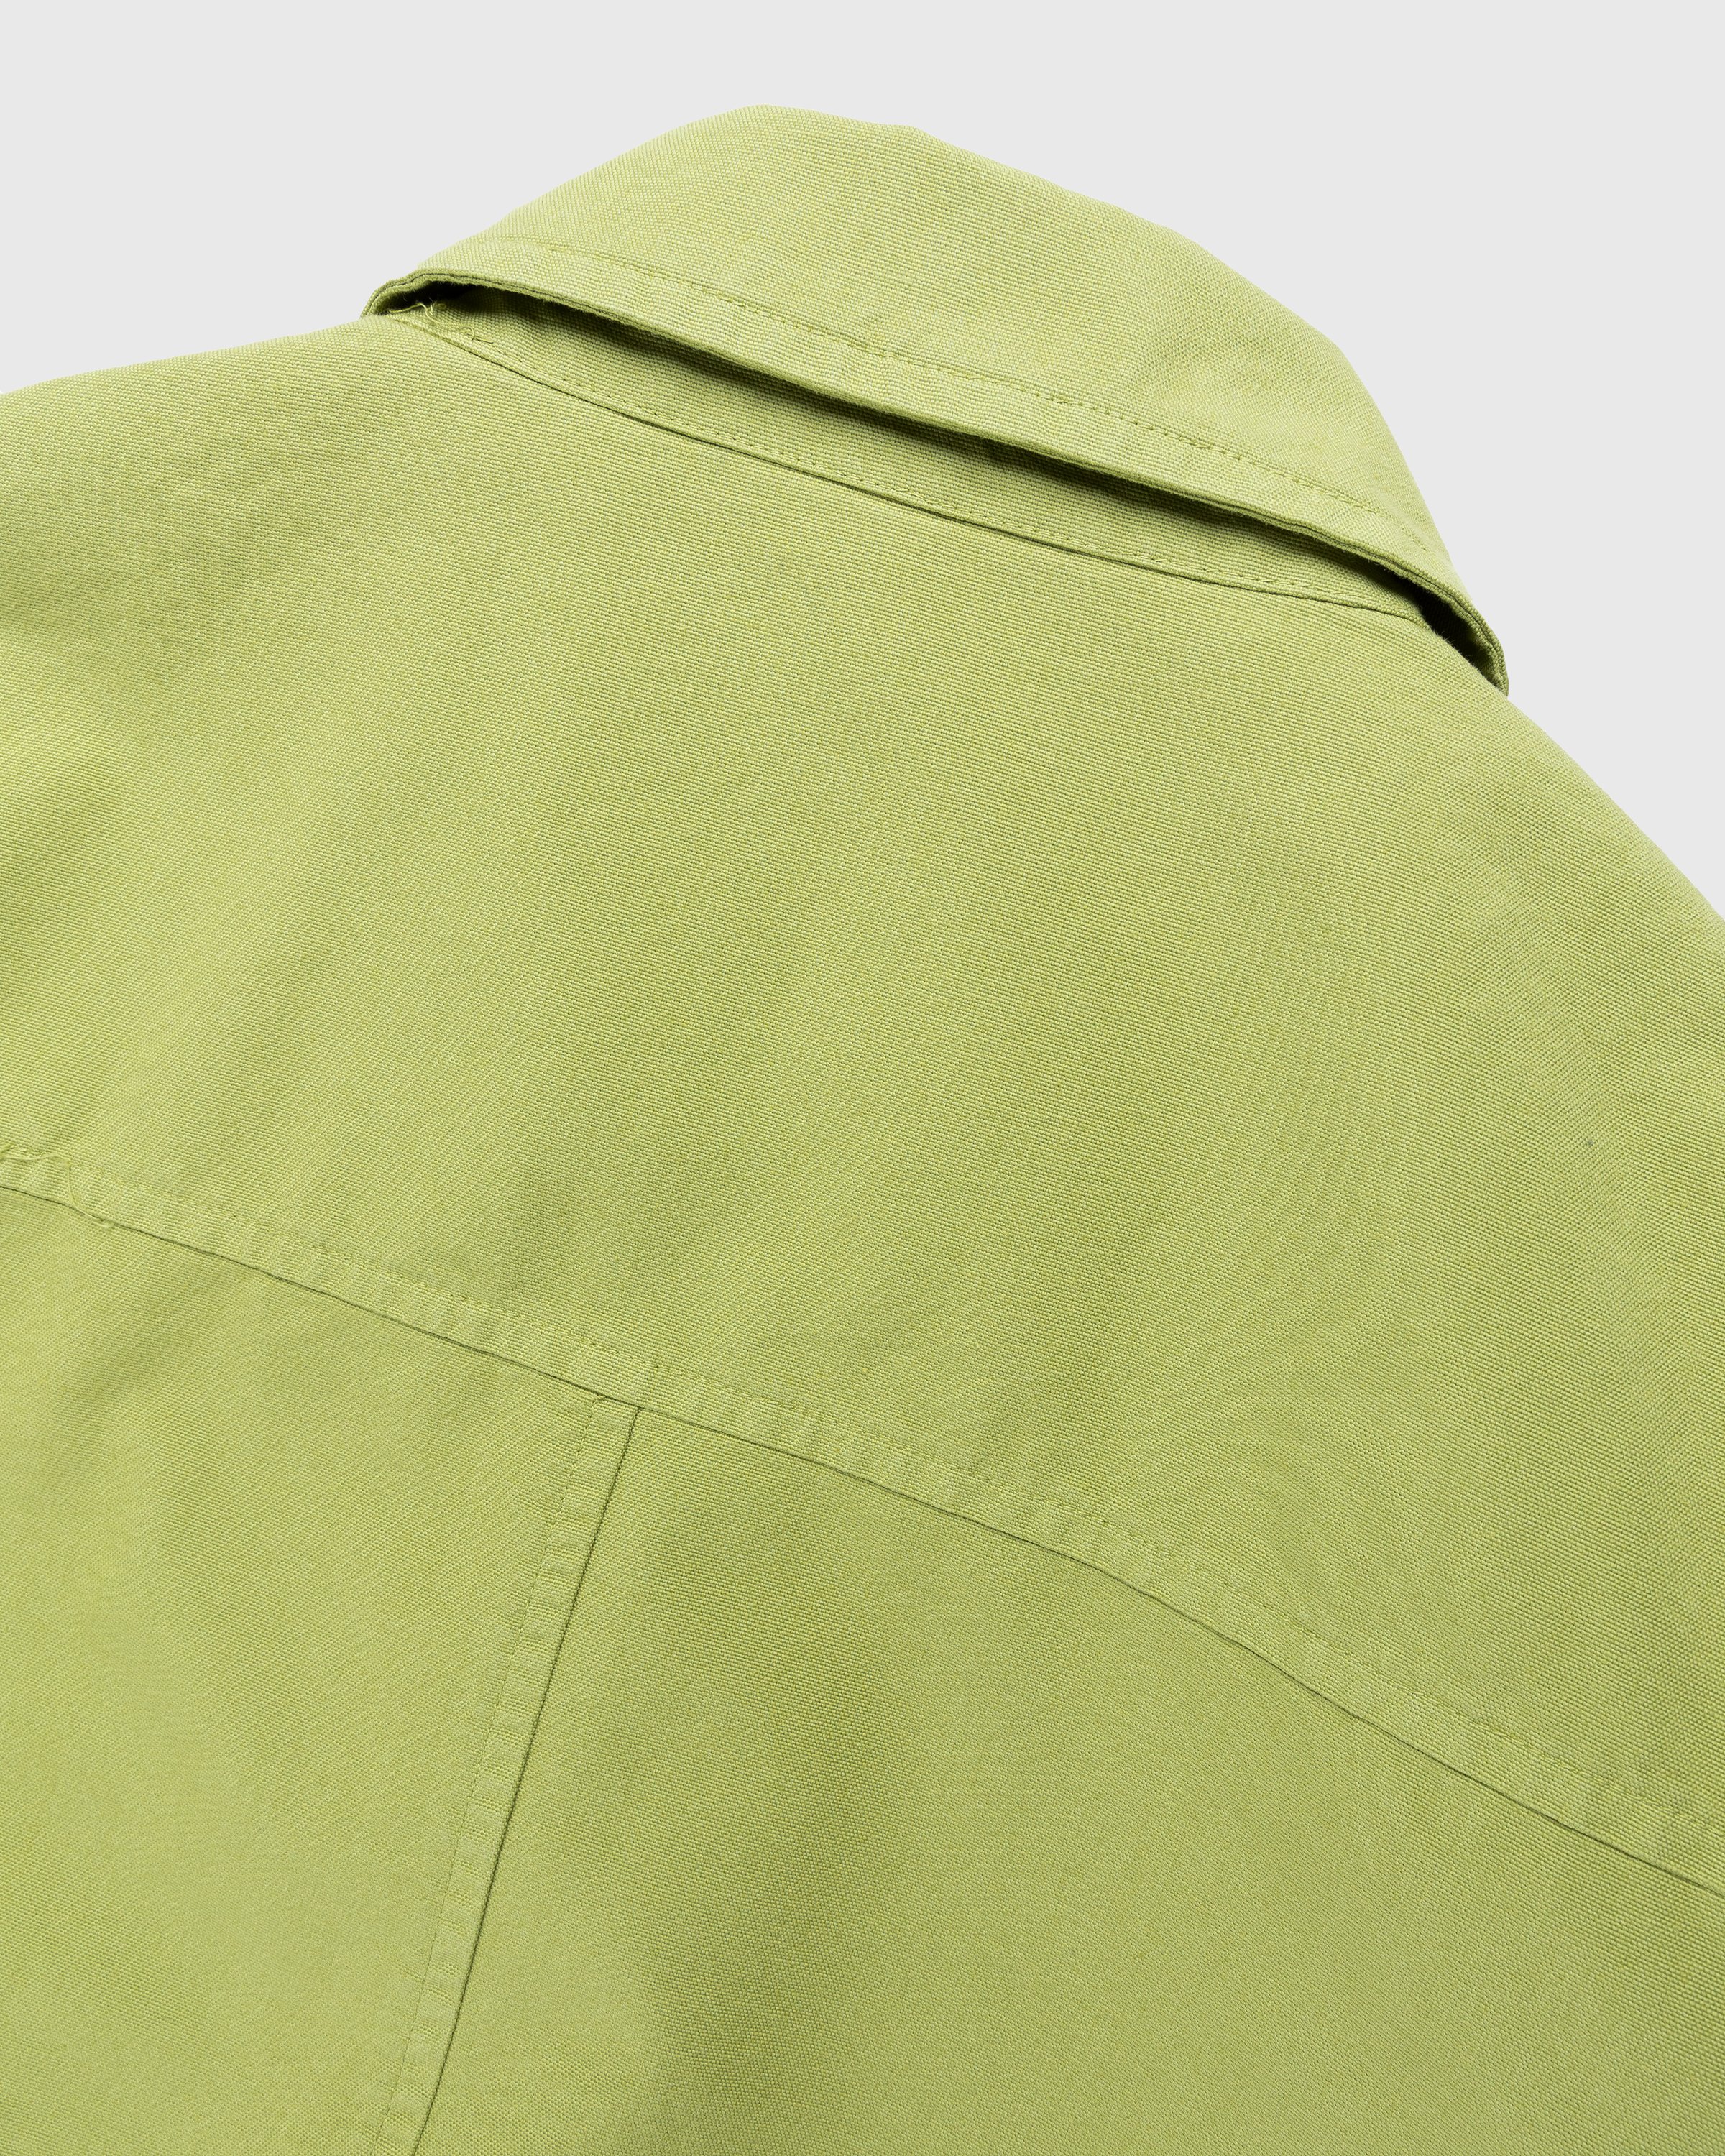 Winnie New York - Double Pocket Cotton Jacket Green - Clothing - Green - Image 3